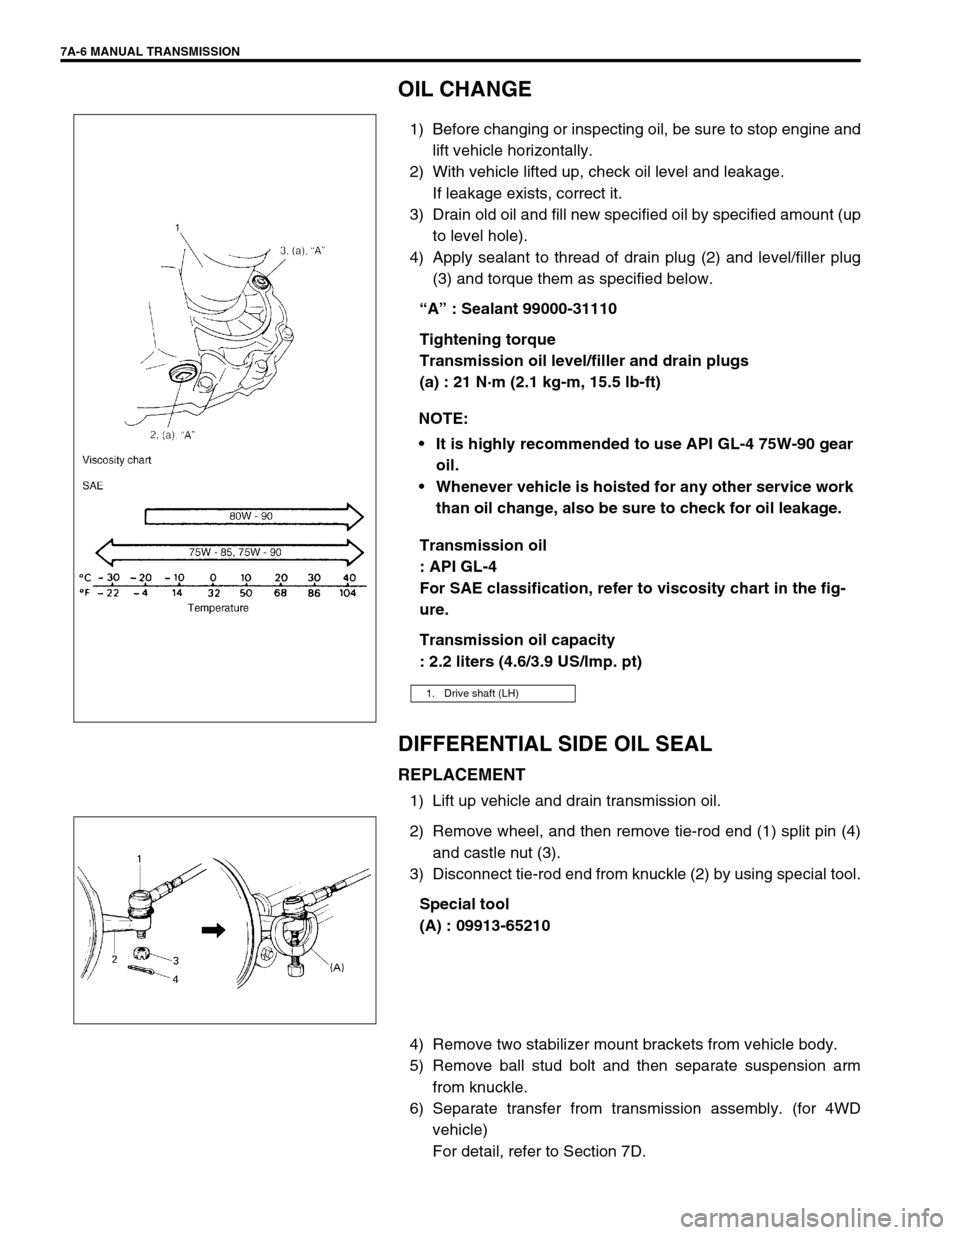 SUZUKI SWIFT 2000 1.G Transmission Service Workshop Manual 7A-6 MANUAL TRANSMISSION
OIL CHANGE
1) Before changing or inspecting oil, be sure to stop engine and
lift vehicle horizontally.
2) With vehicle lifted up, check oil level and leakage. 
If leakage exis